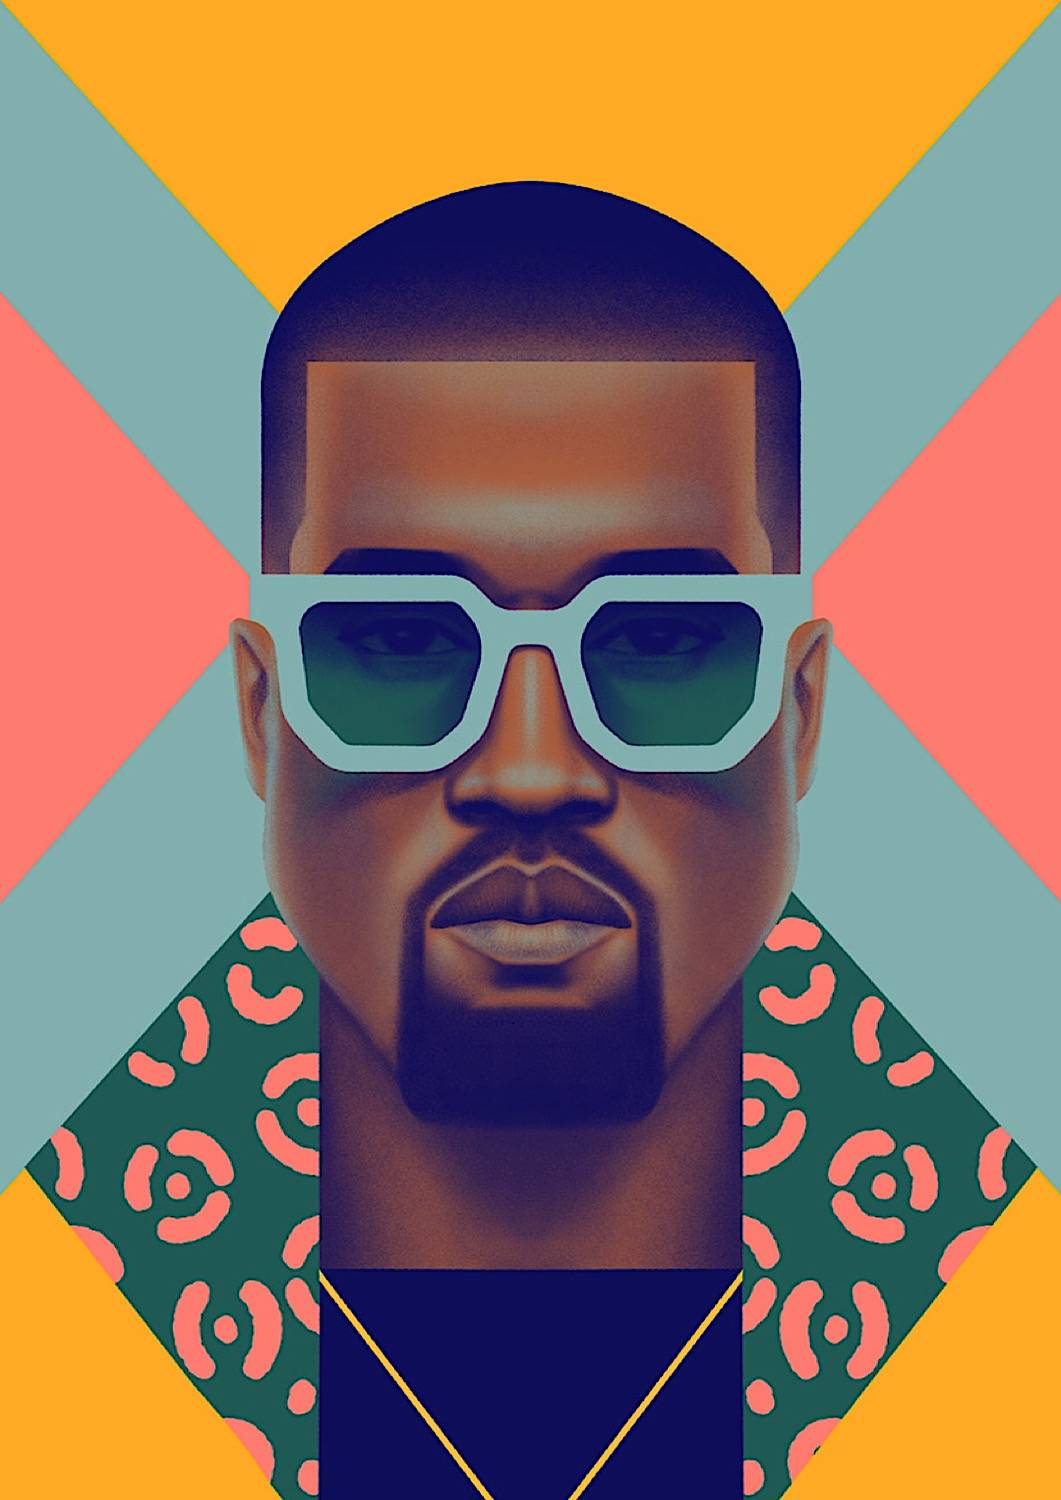 Kanye West, one of the most creative musicians